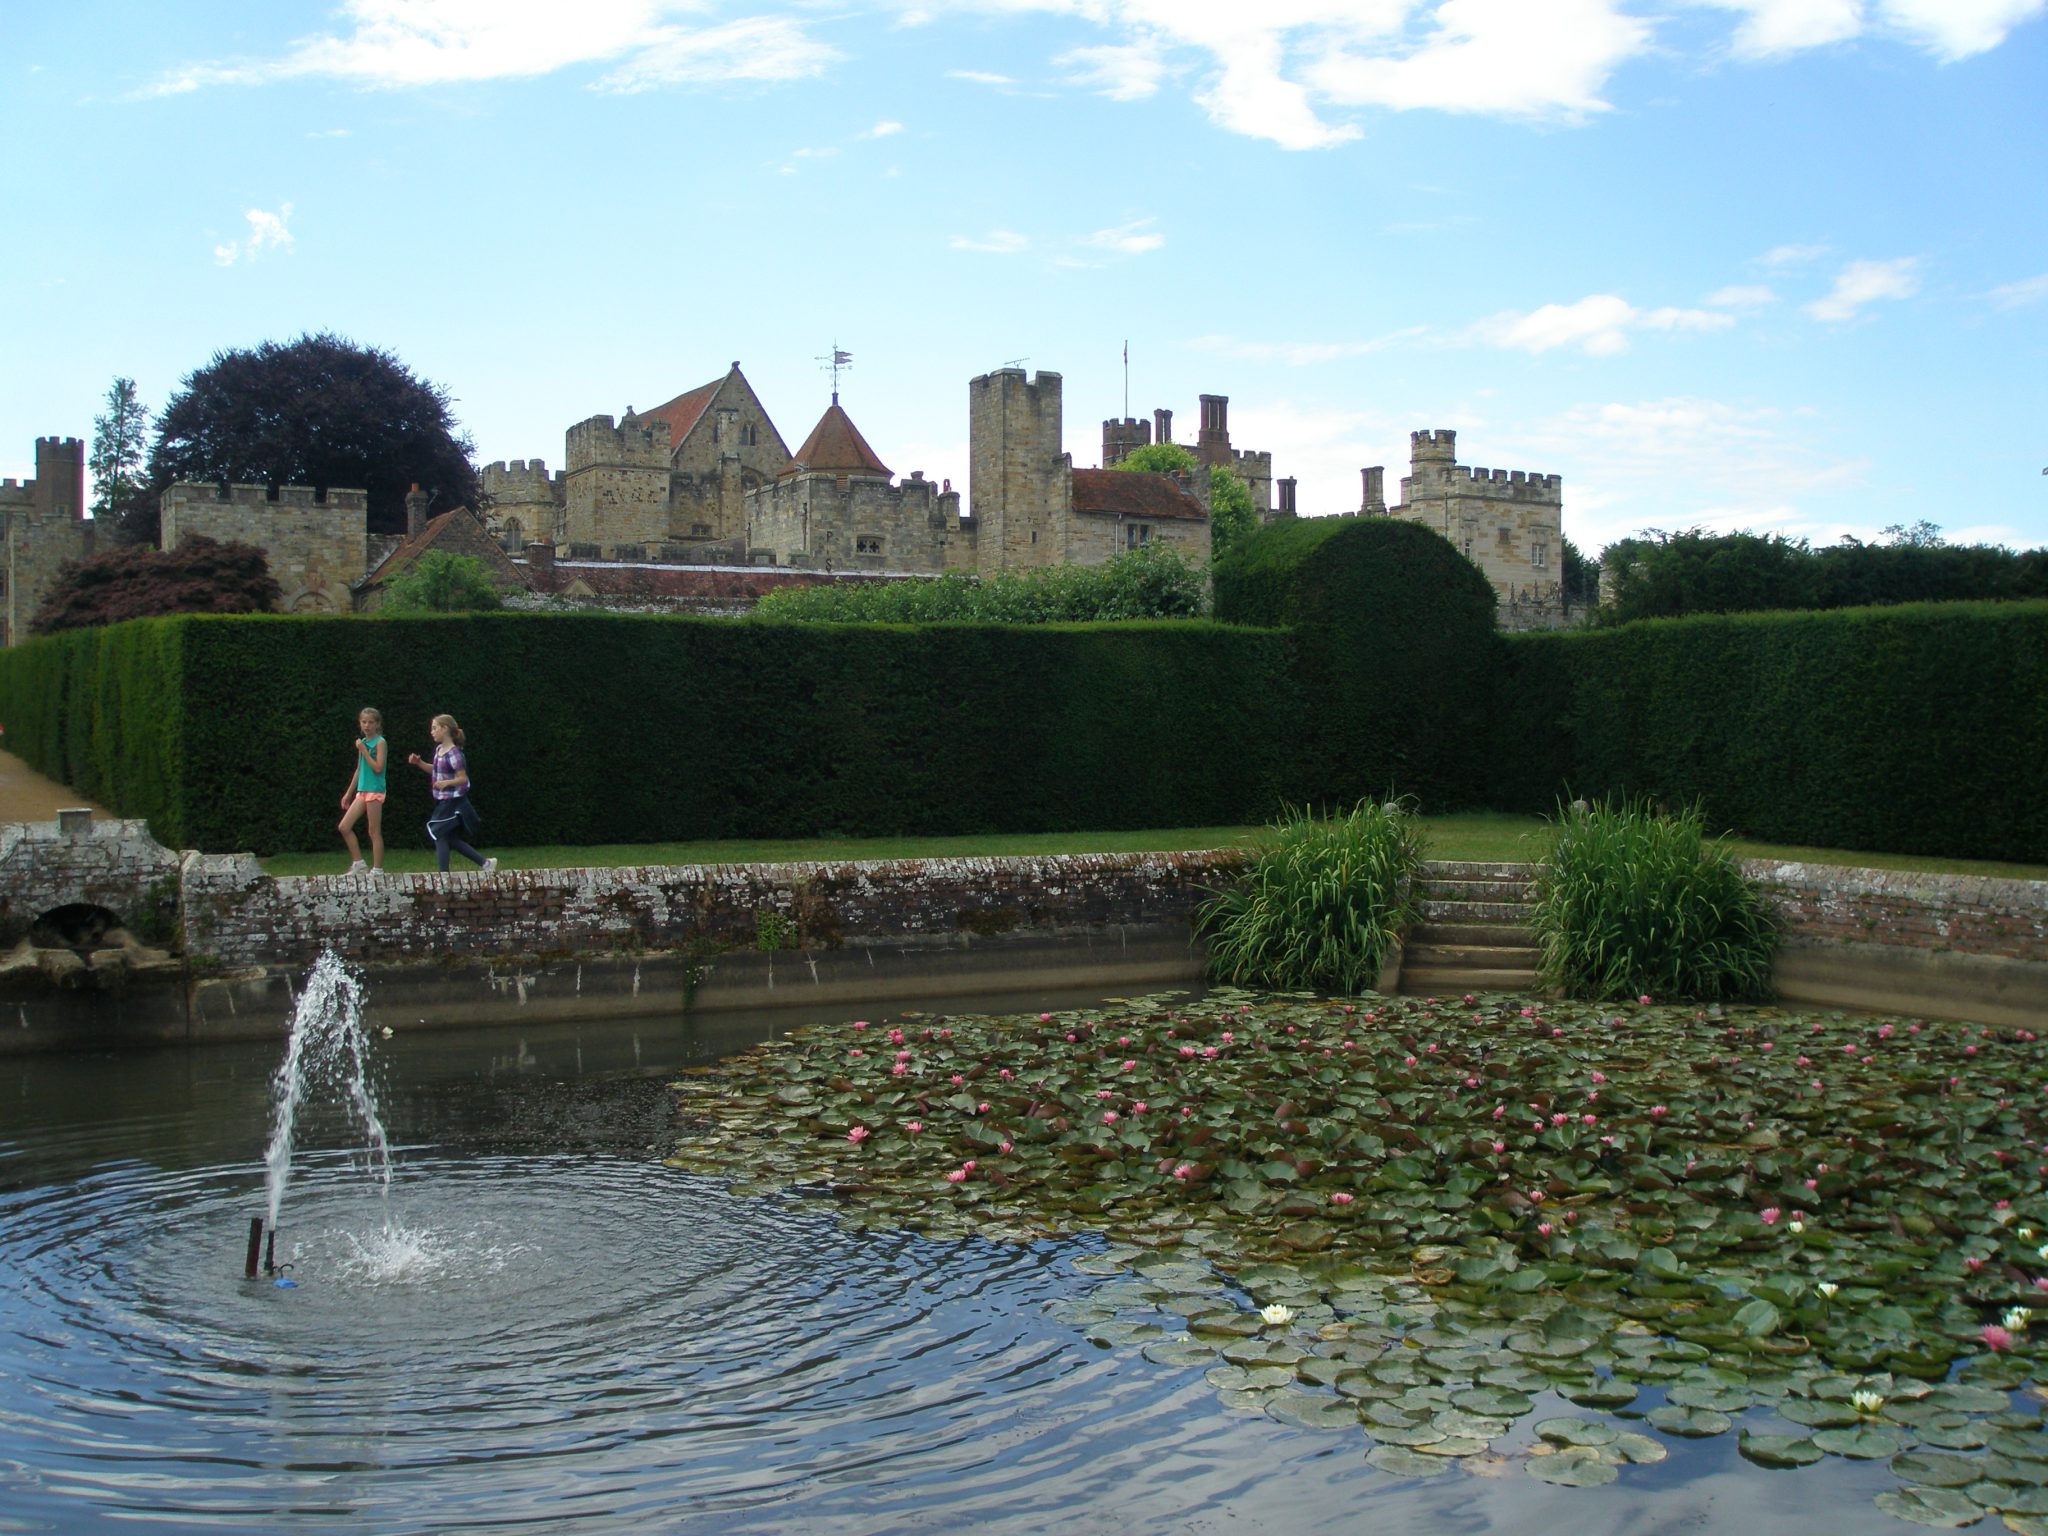 Diana's Bath, which was formed from an Elizabethan Stew Pond. These Tudor pools were stocked with fish, and provided handy, fresh food for the kitchens of great houses.